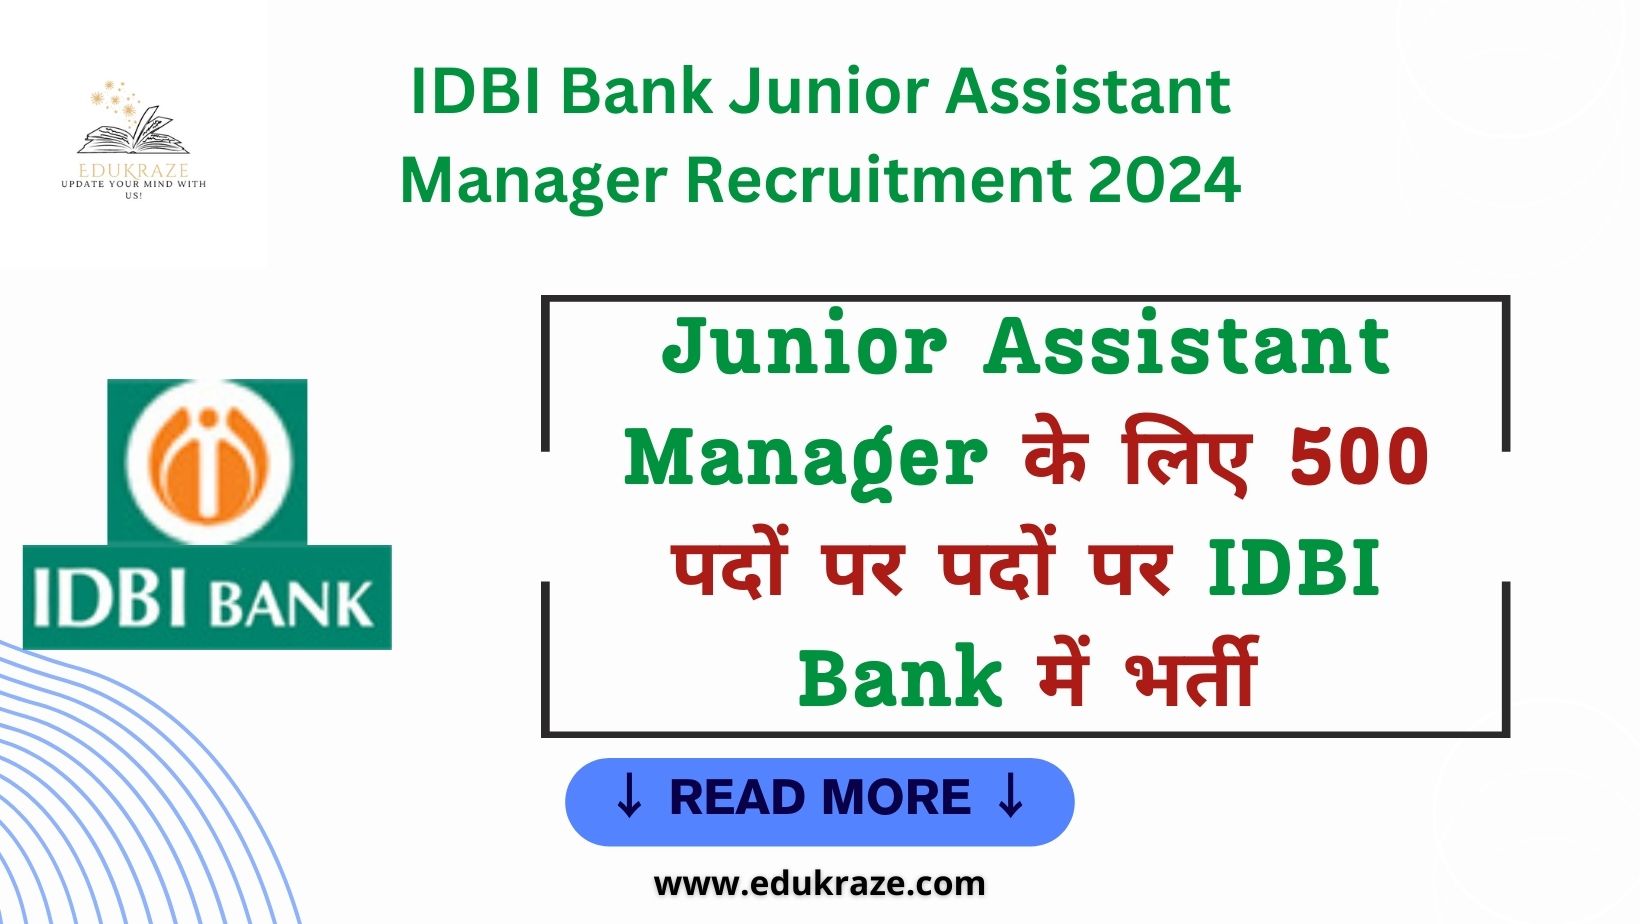 IDBI Bank Junior Assistant Manager Recruitment 2024 Out for 500 Vacancies